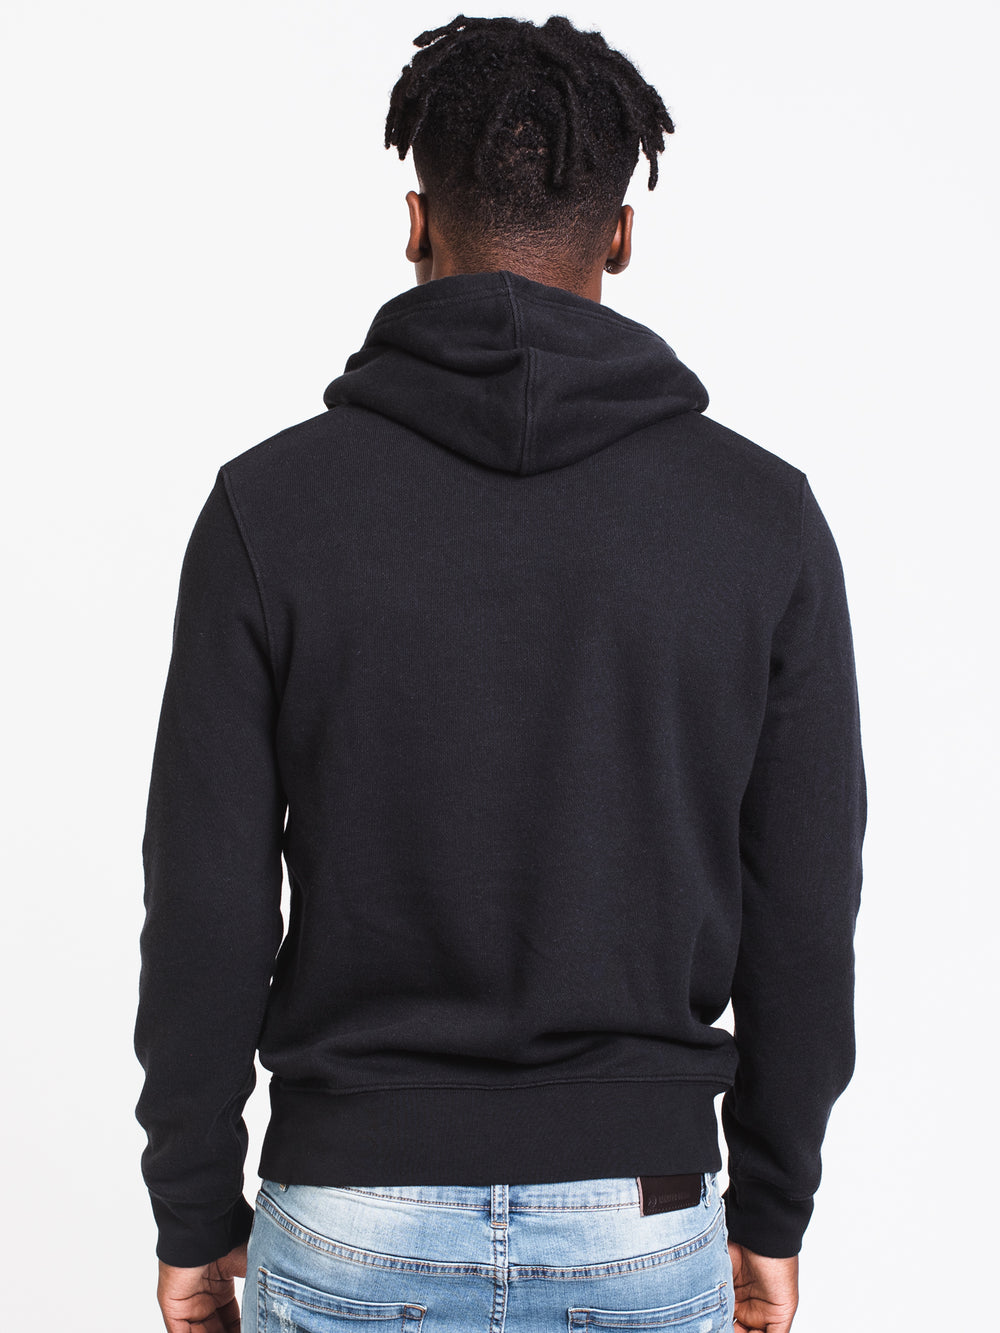 MENS GRAPHIC PULLOVER HOODIE- BLACK - CLEARANCE